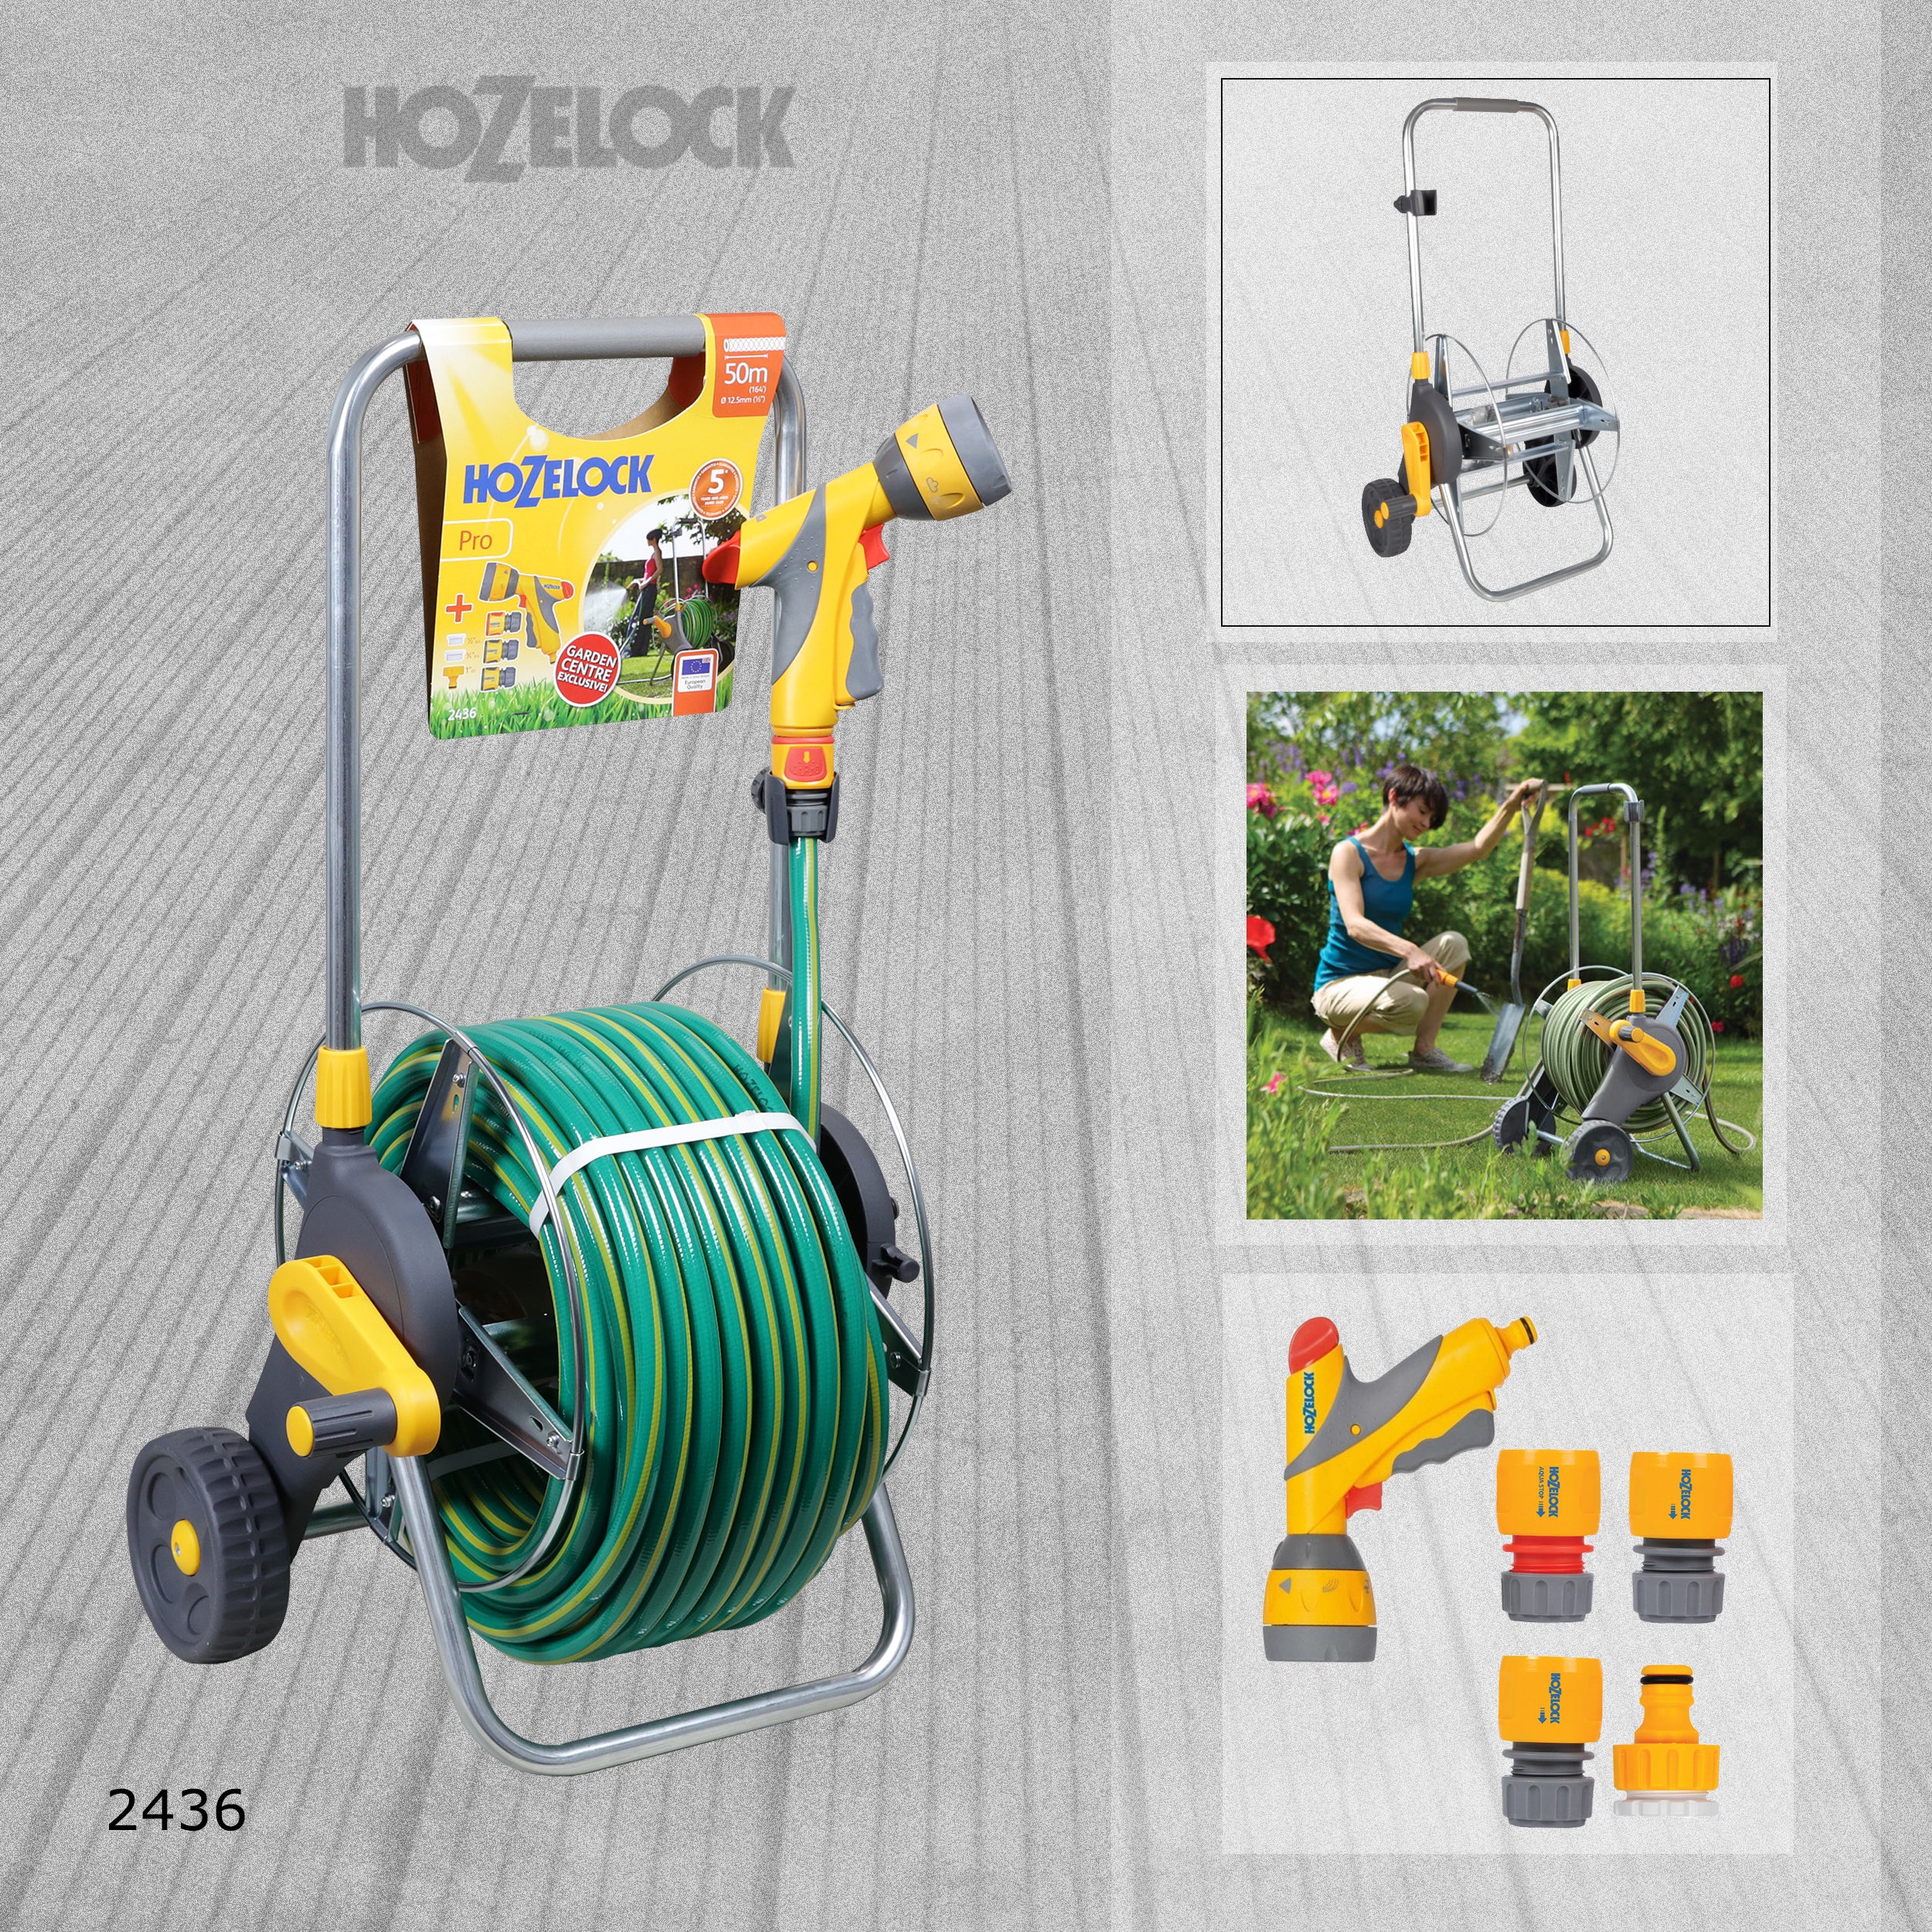 Hozelock 2436 Pro 60m Assembled Hose Cart with 50m Hose - with spray gun and fixings